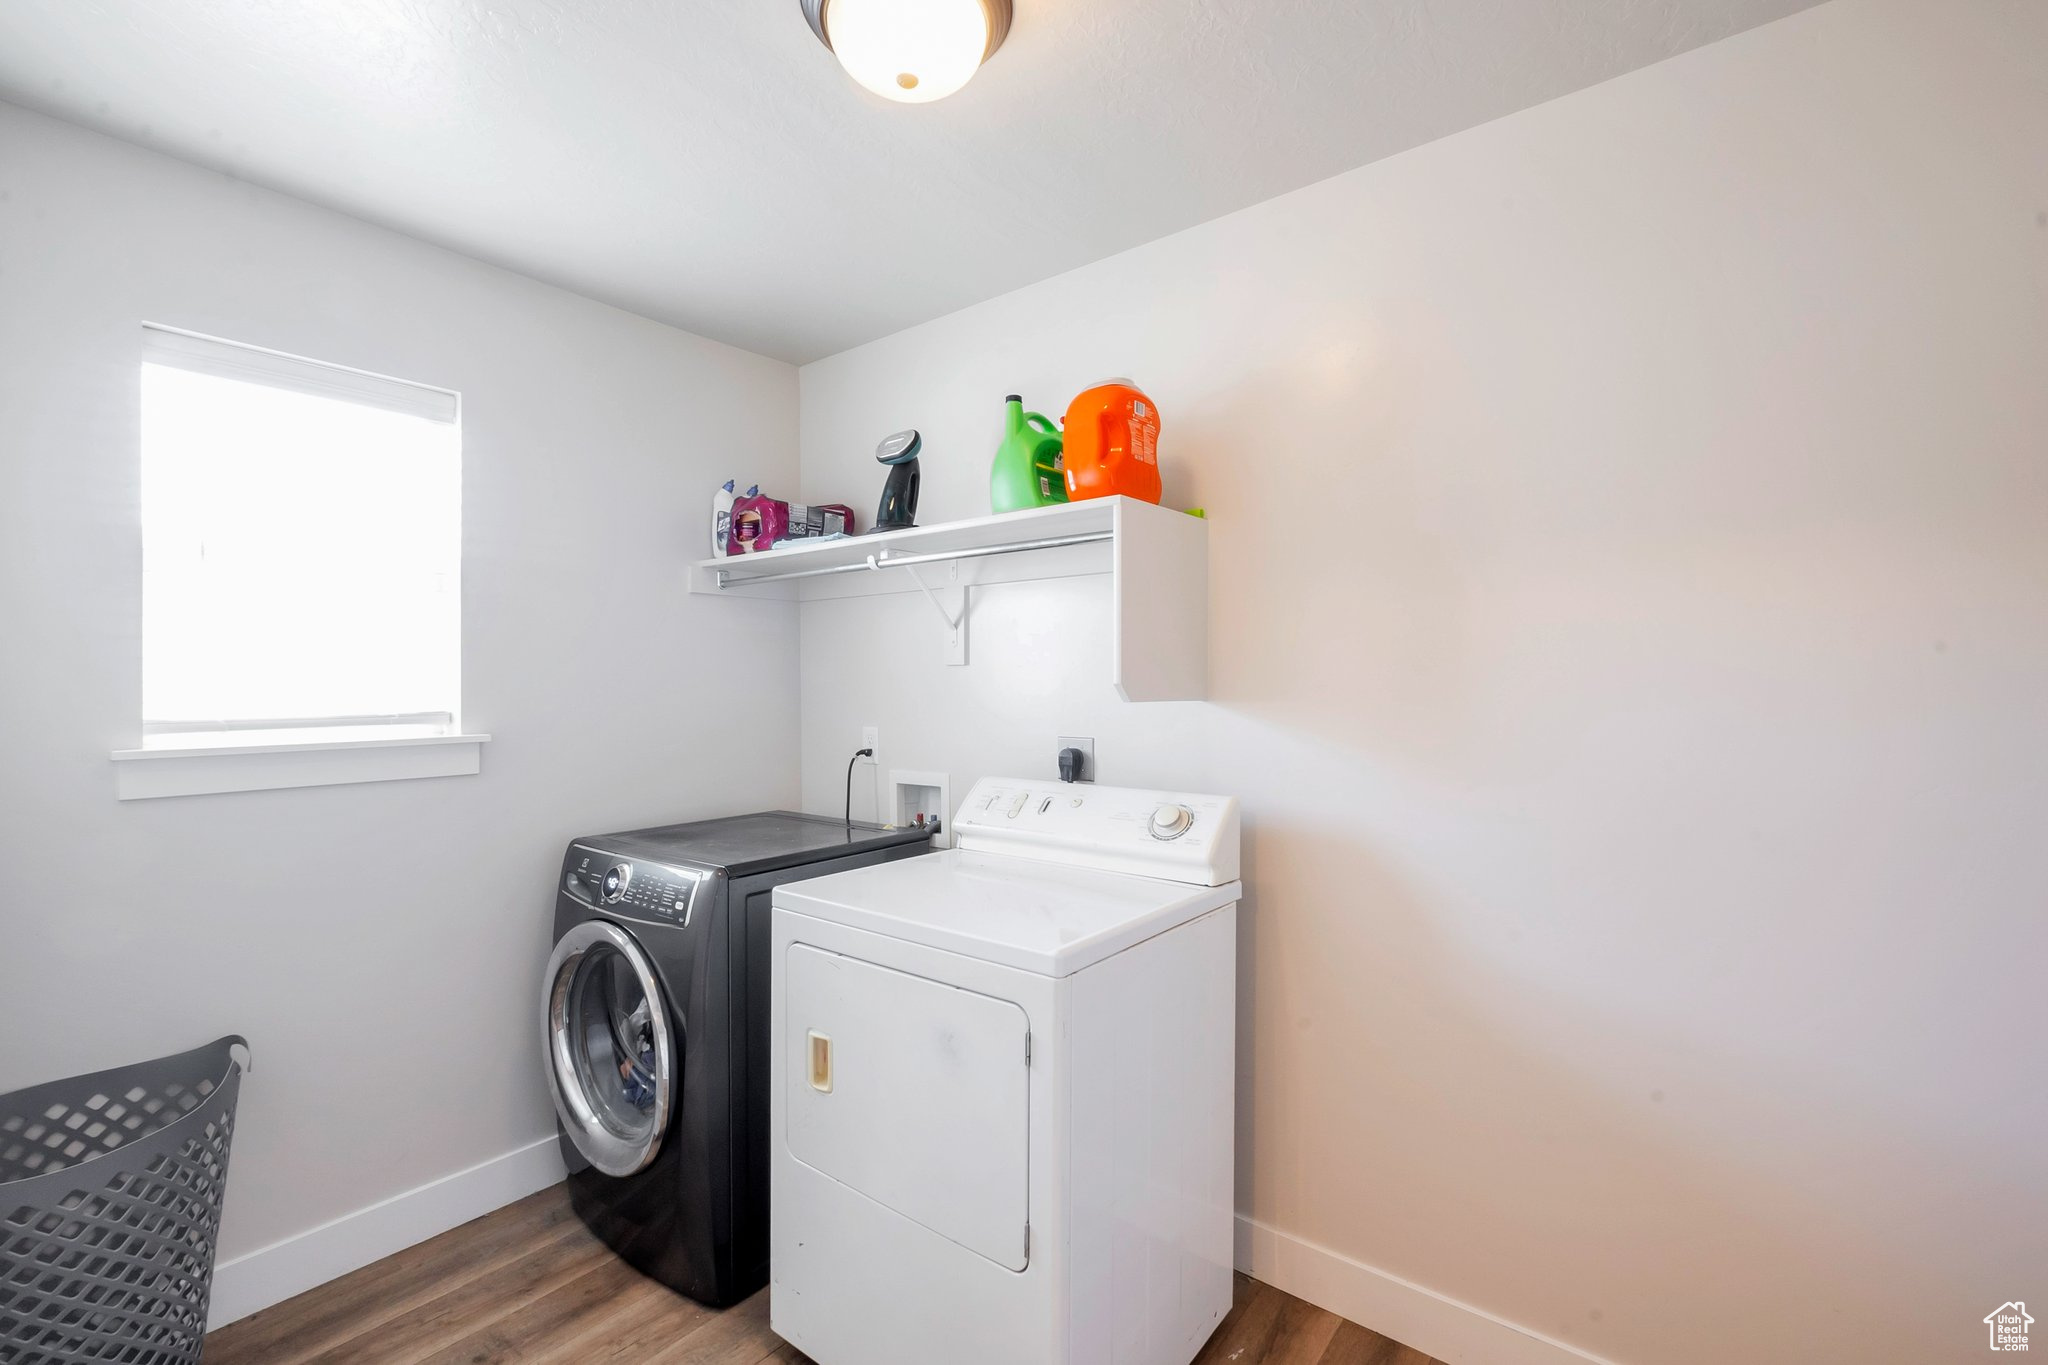 Washroom featuring hardwood / wood-style flooring, hookup for a washing machine, and separate washer and dryer